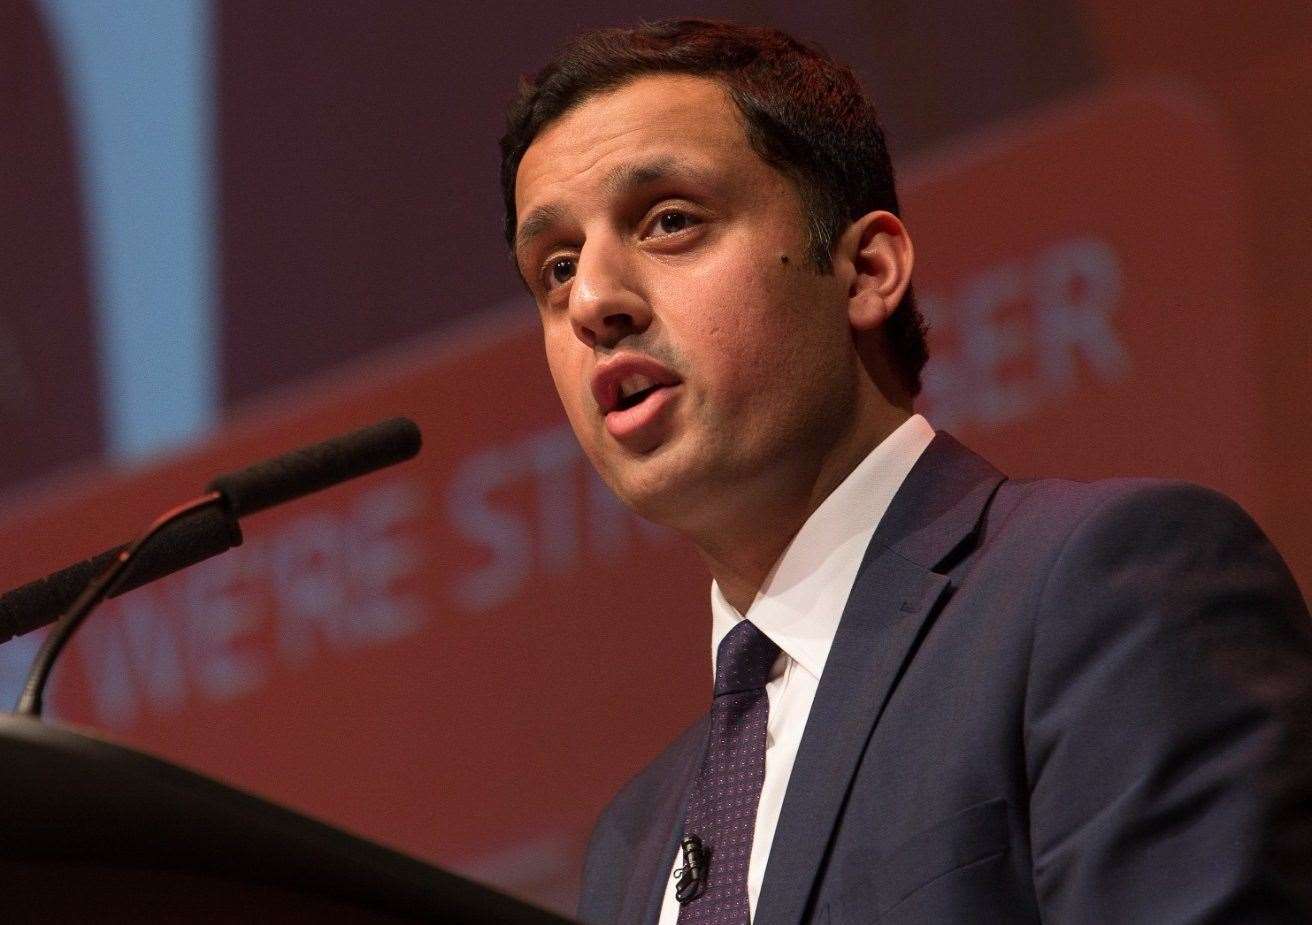 Scottish Labour leader Anas Sarwar said the Scottish Government was wrong to be so 'intransigent' on the nuclear issue.